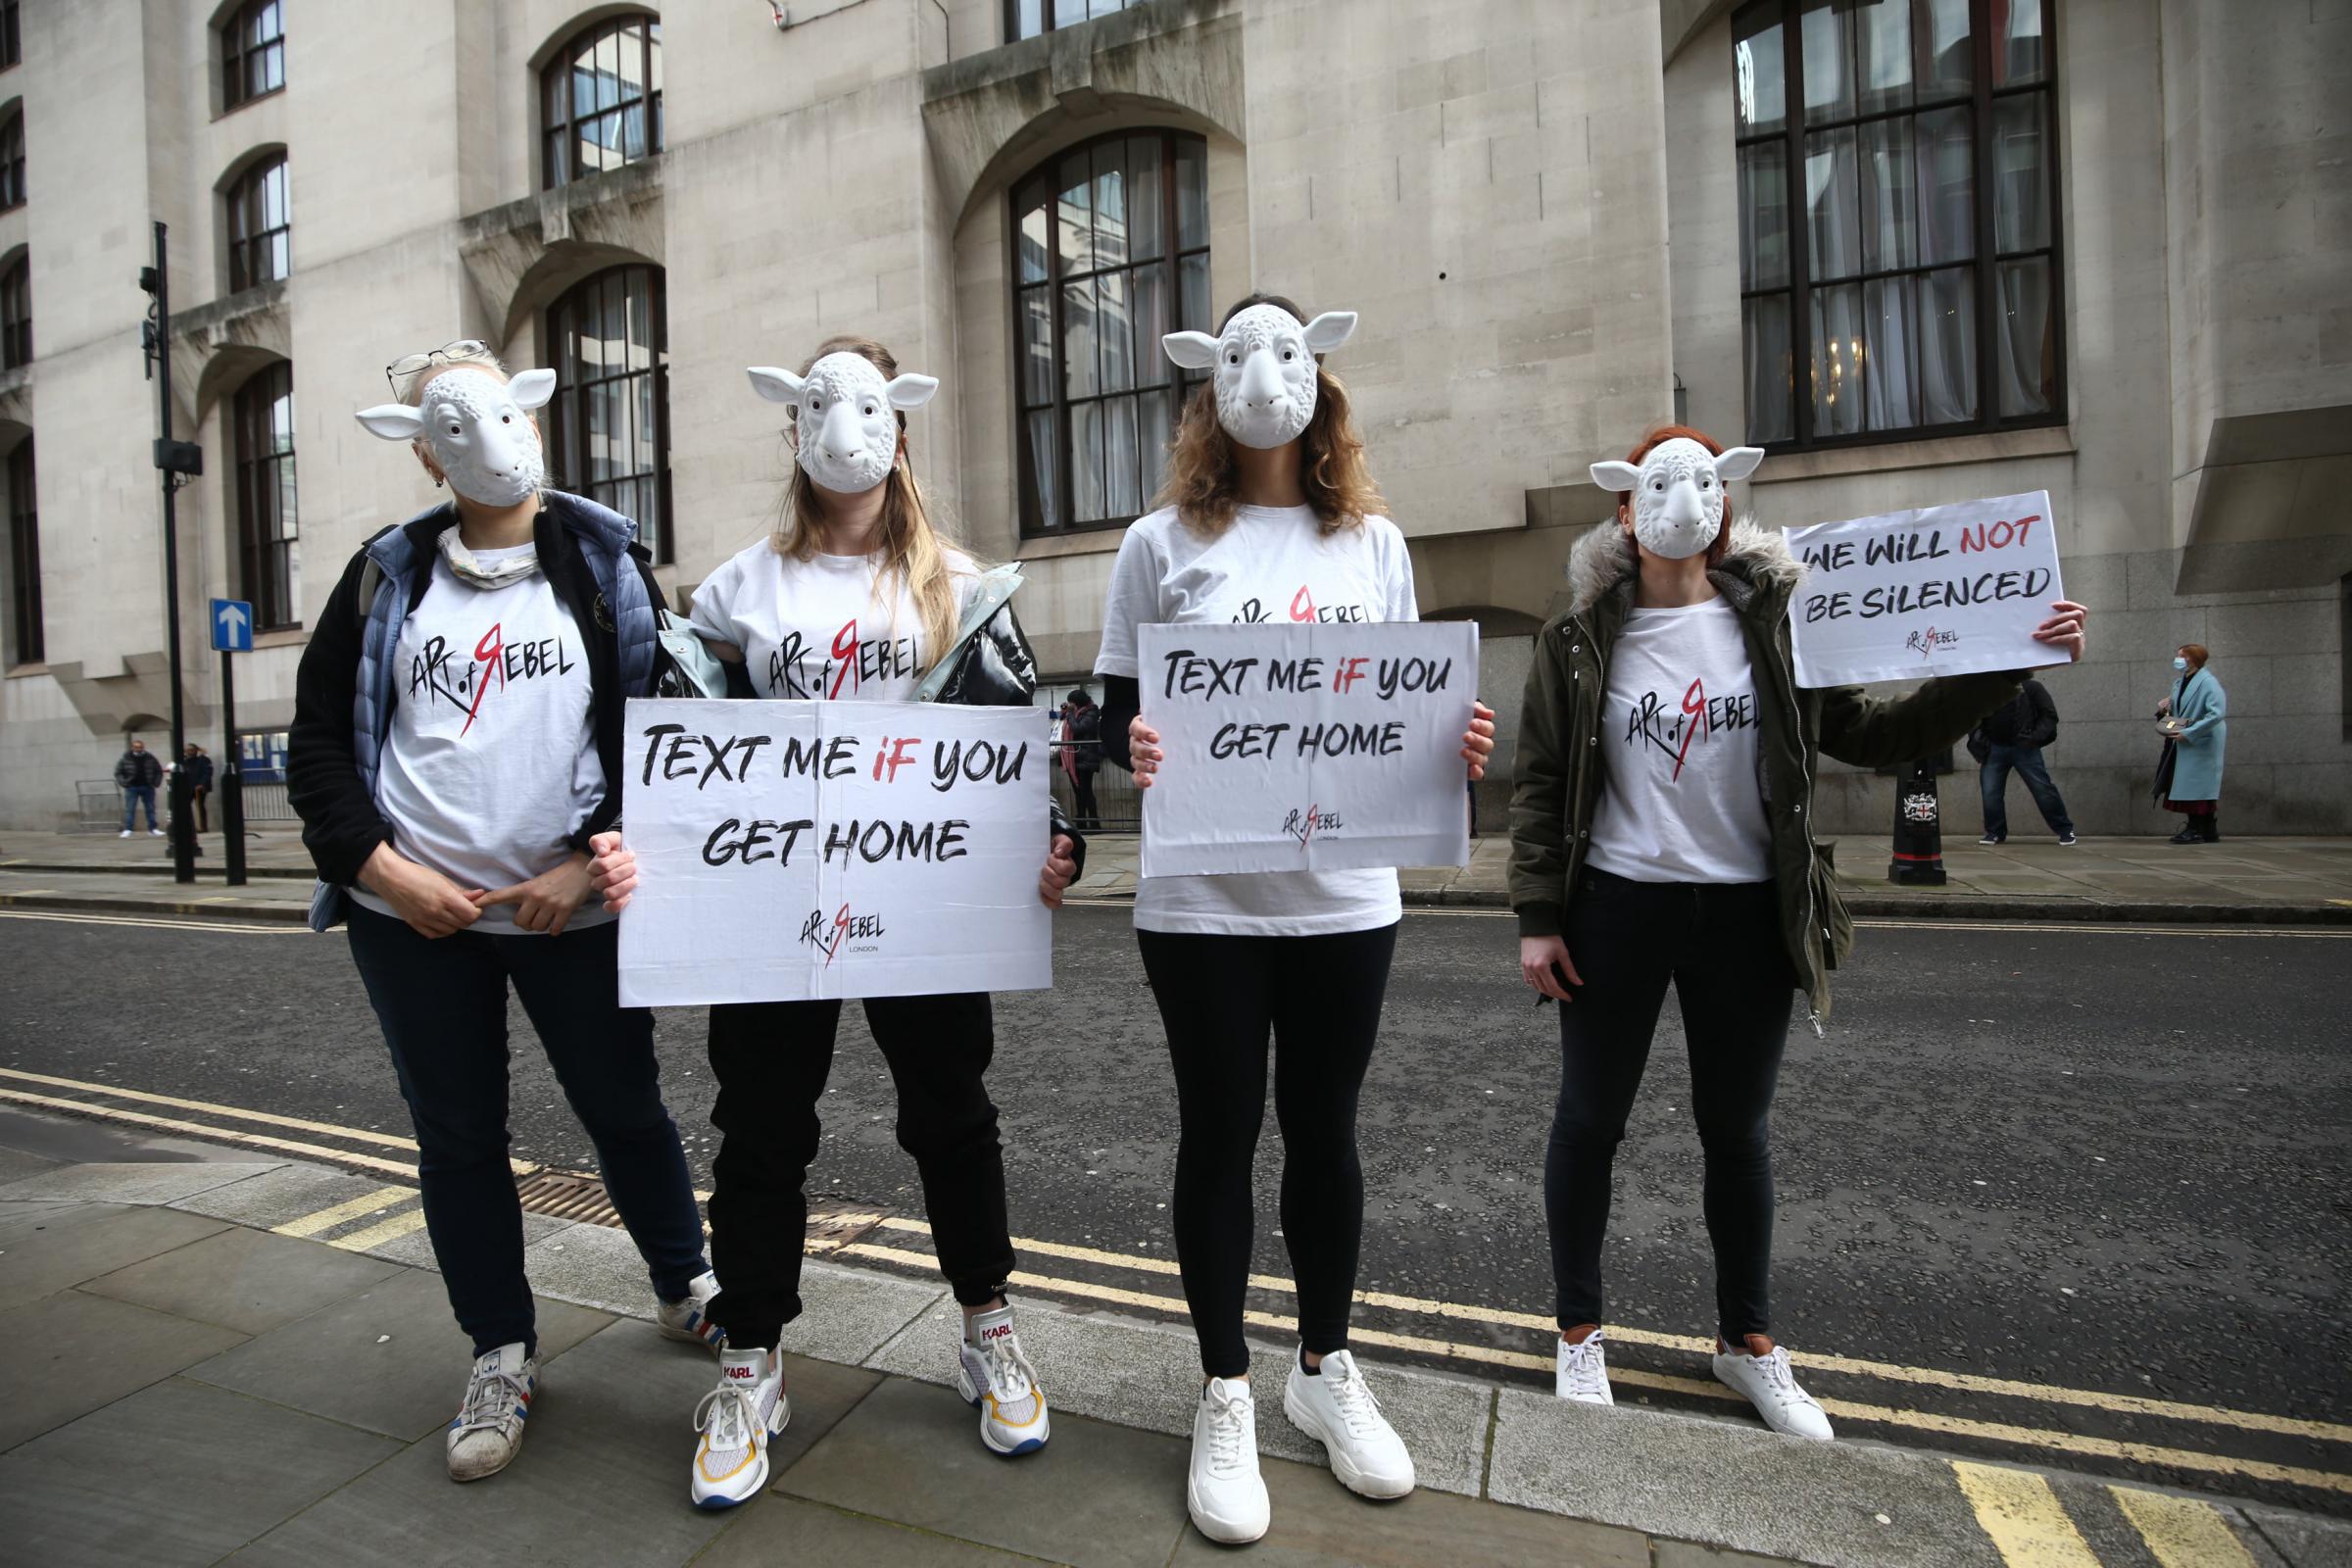 Members of Art of Rebel protest outside the Old Bailey in London where serving police constable Wayne Couzens is due to appear charged with the murder and kidnapping of Sarah Everard. Yui Mok/PA Wire 